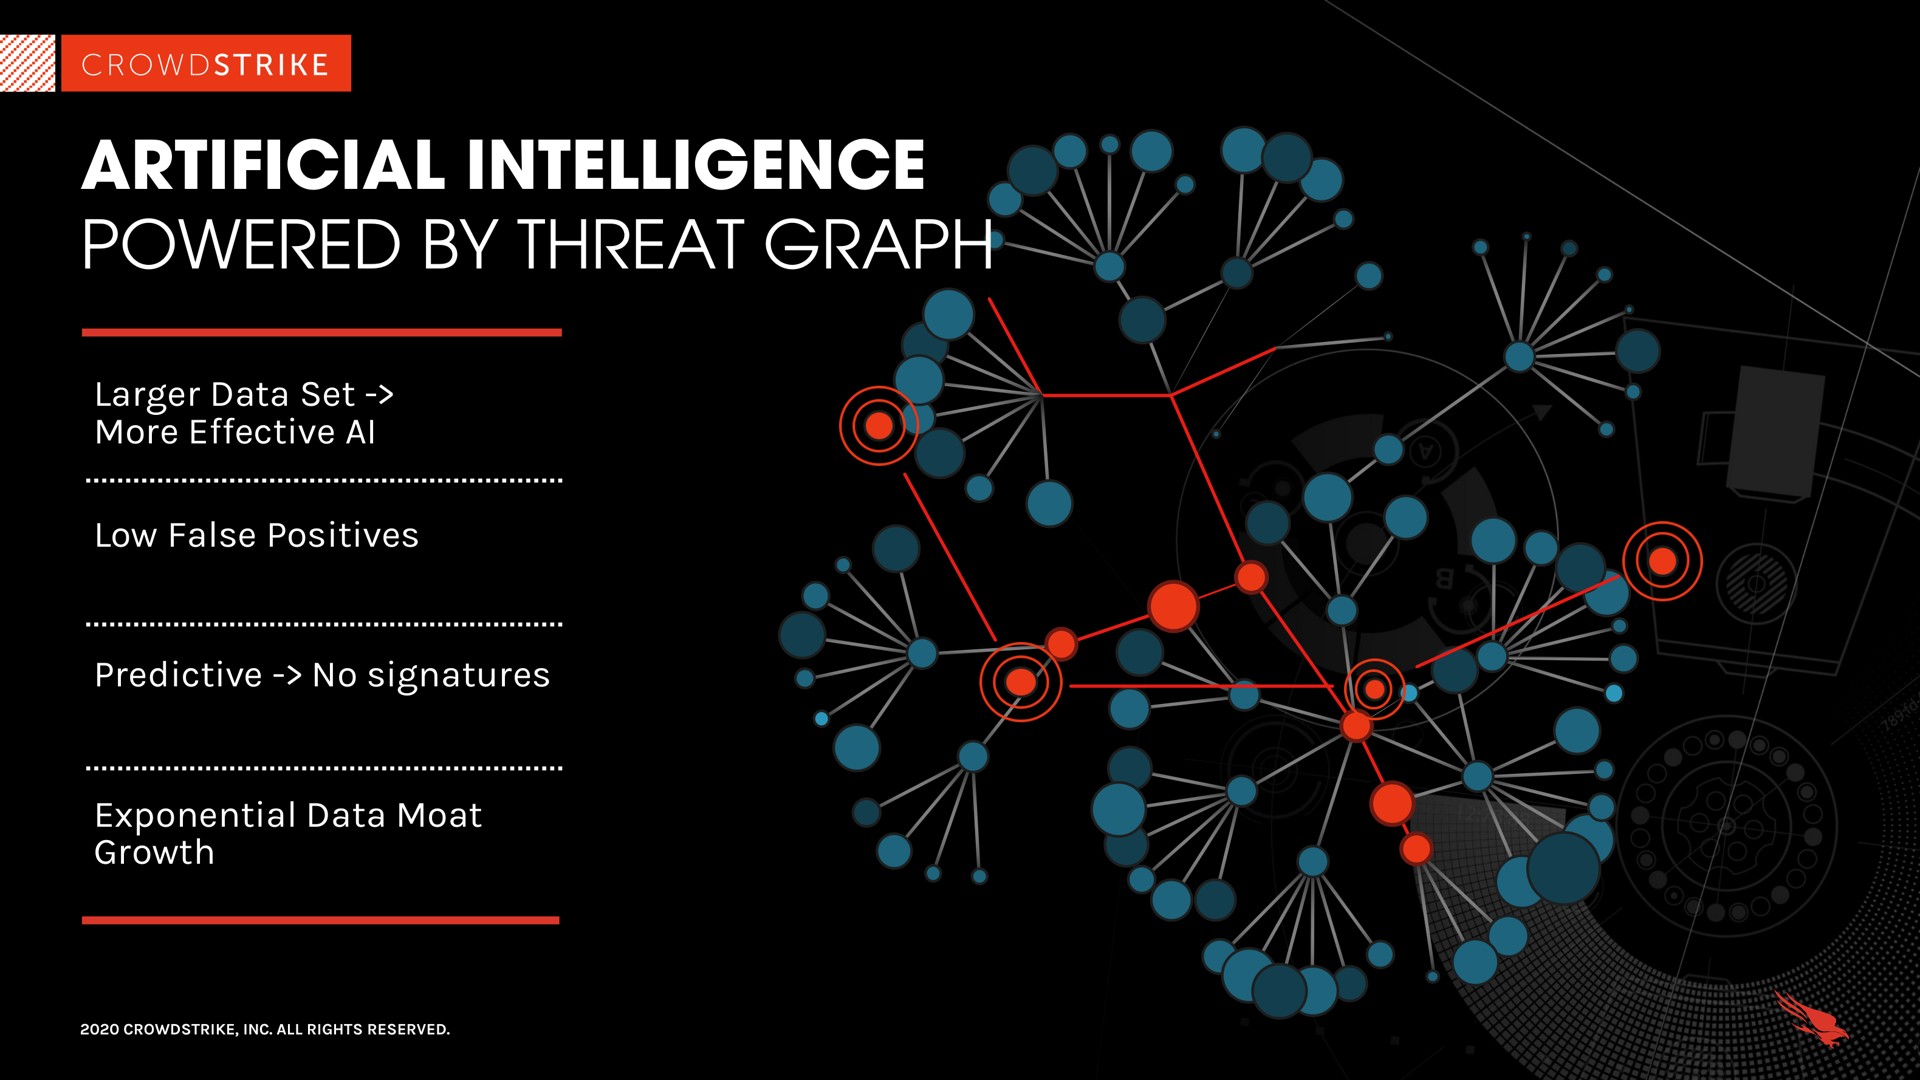 artificial intelligence powered by threat graph idea alo be als aga | Crowdstrike